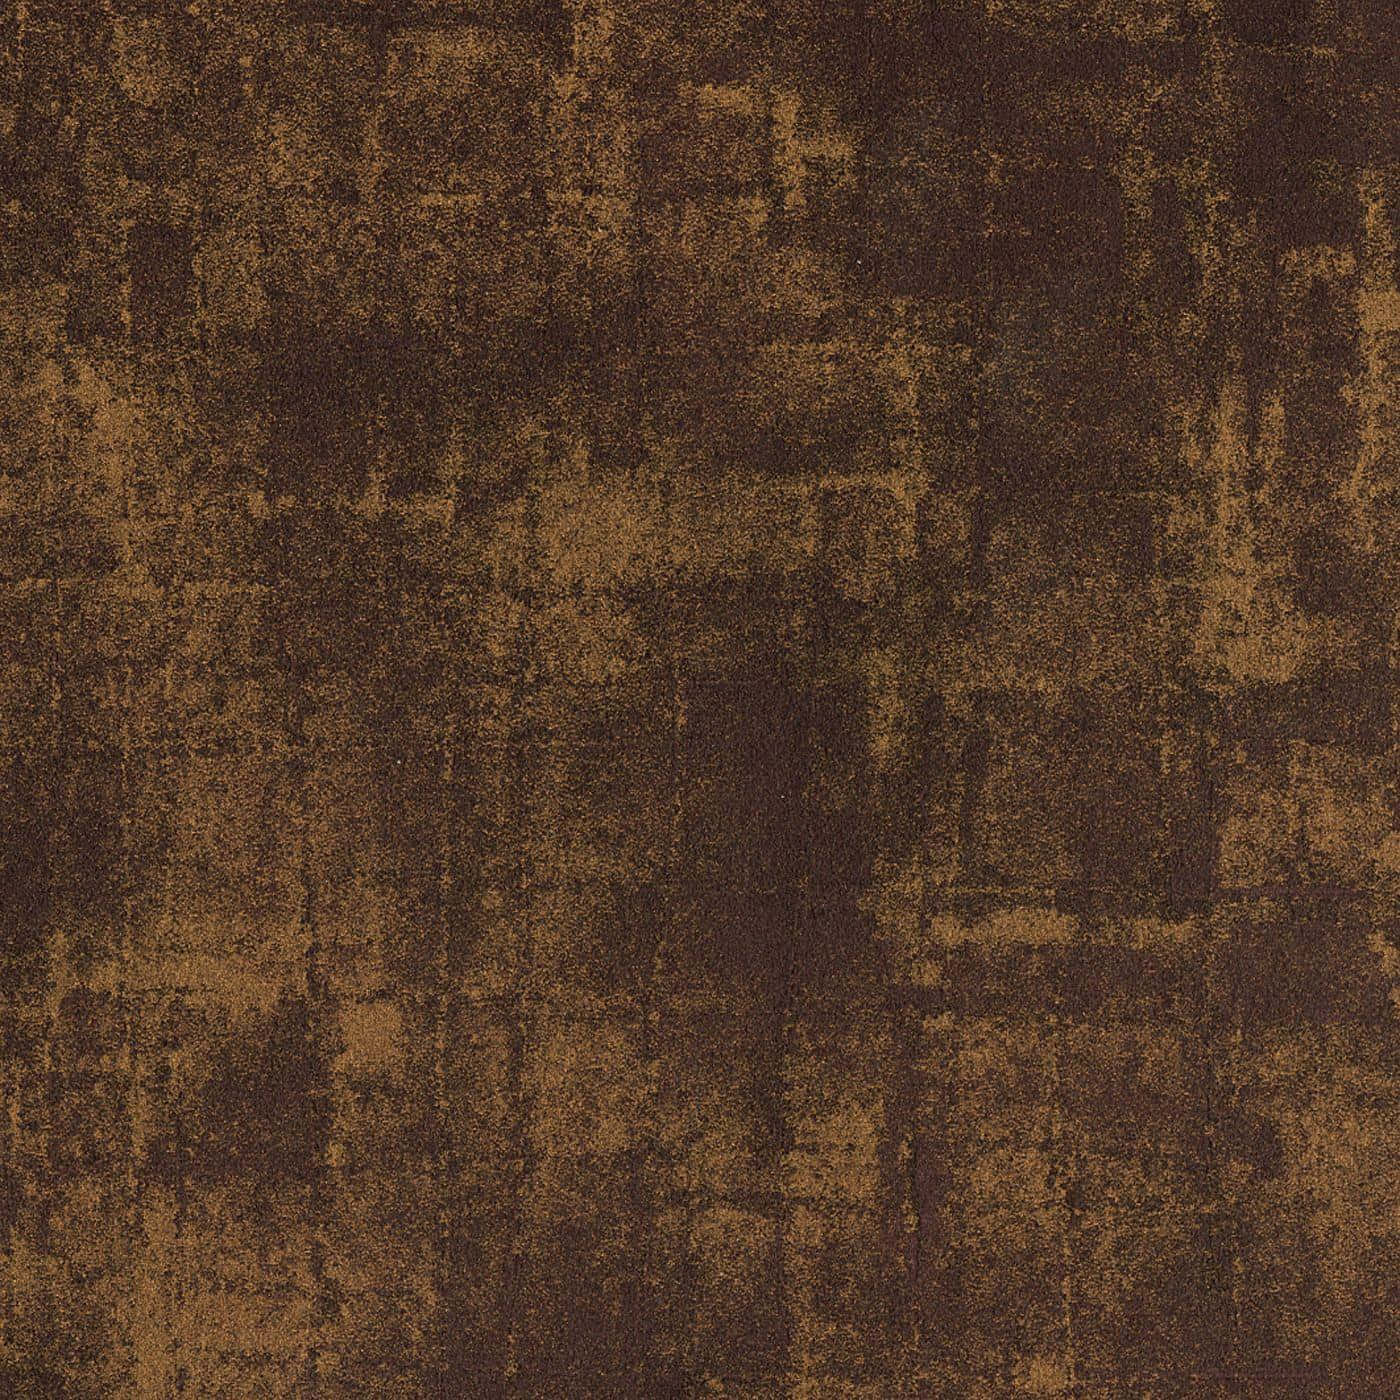 A Brown And Brown Textured Background Wallpaper